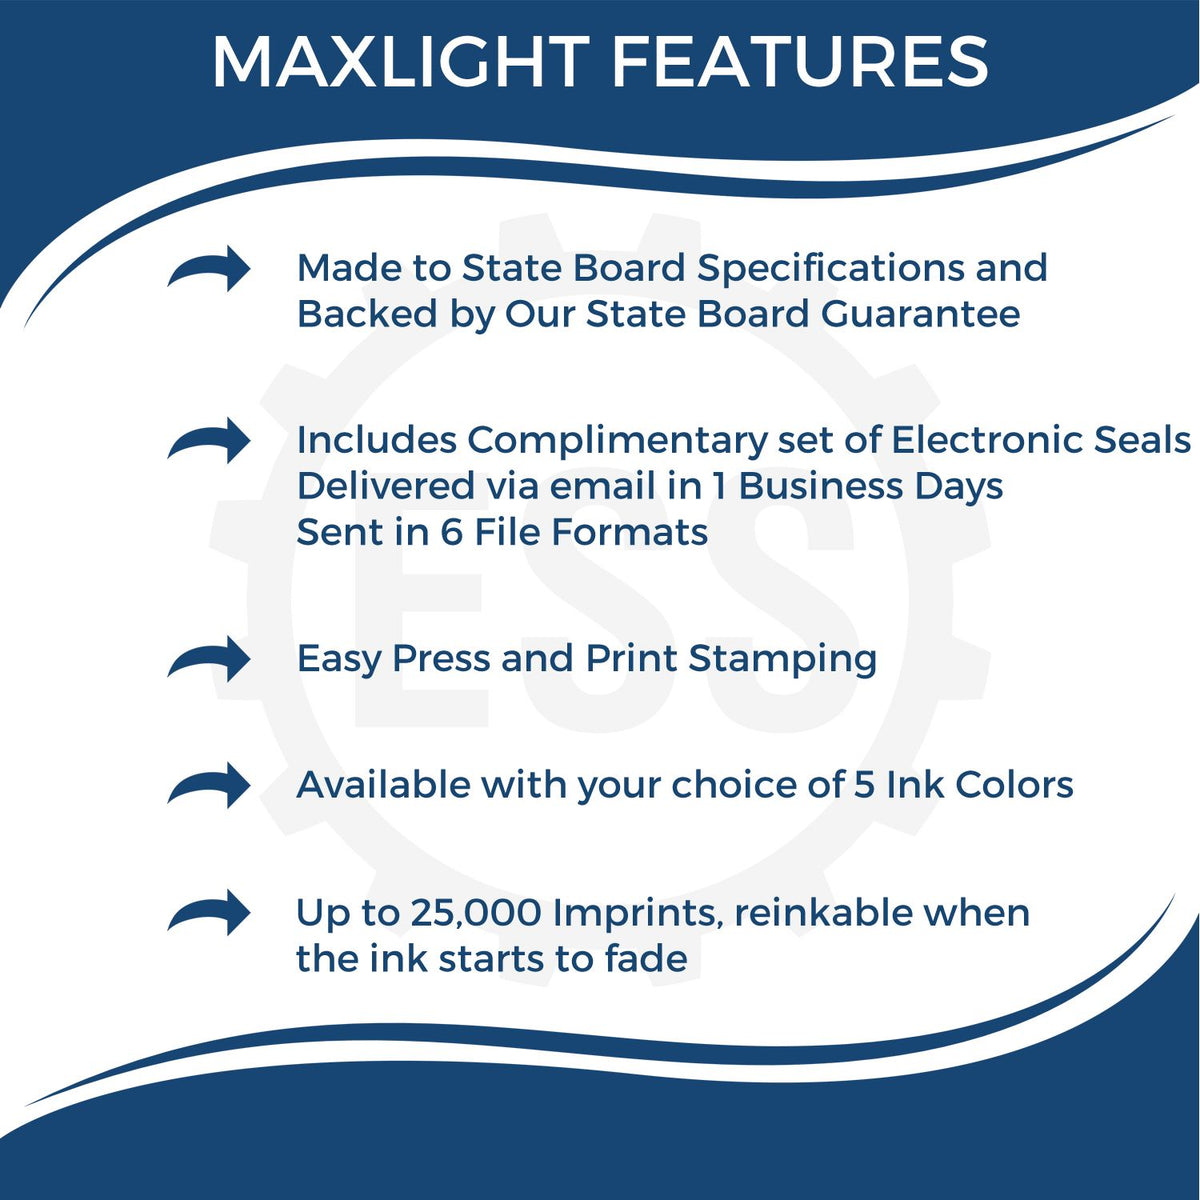 A picture of an infographic highlighting the selling points for the Premium MaxLight Pre-Inked Connecticut Geology Stamp